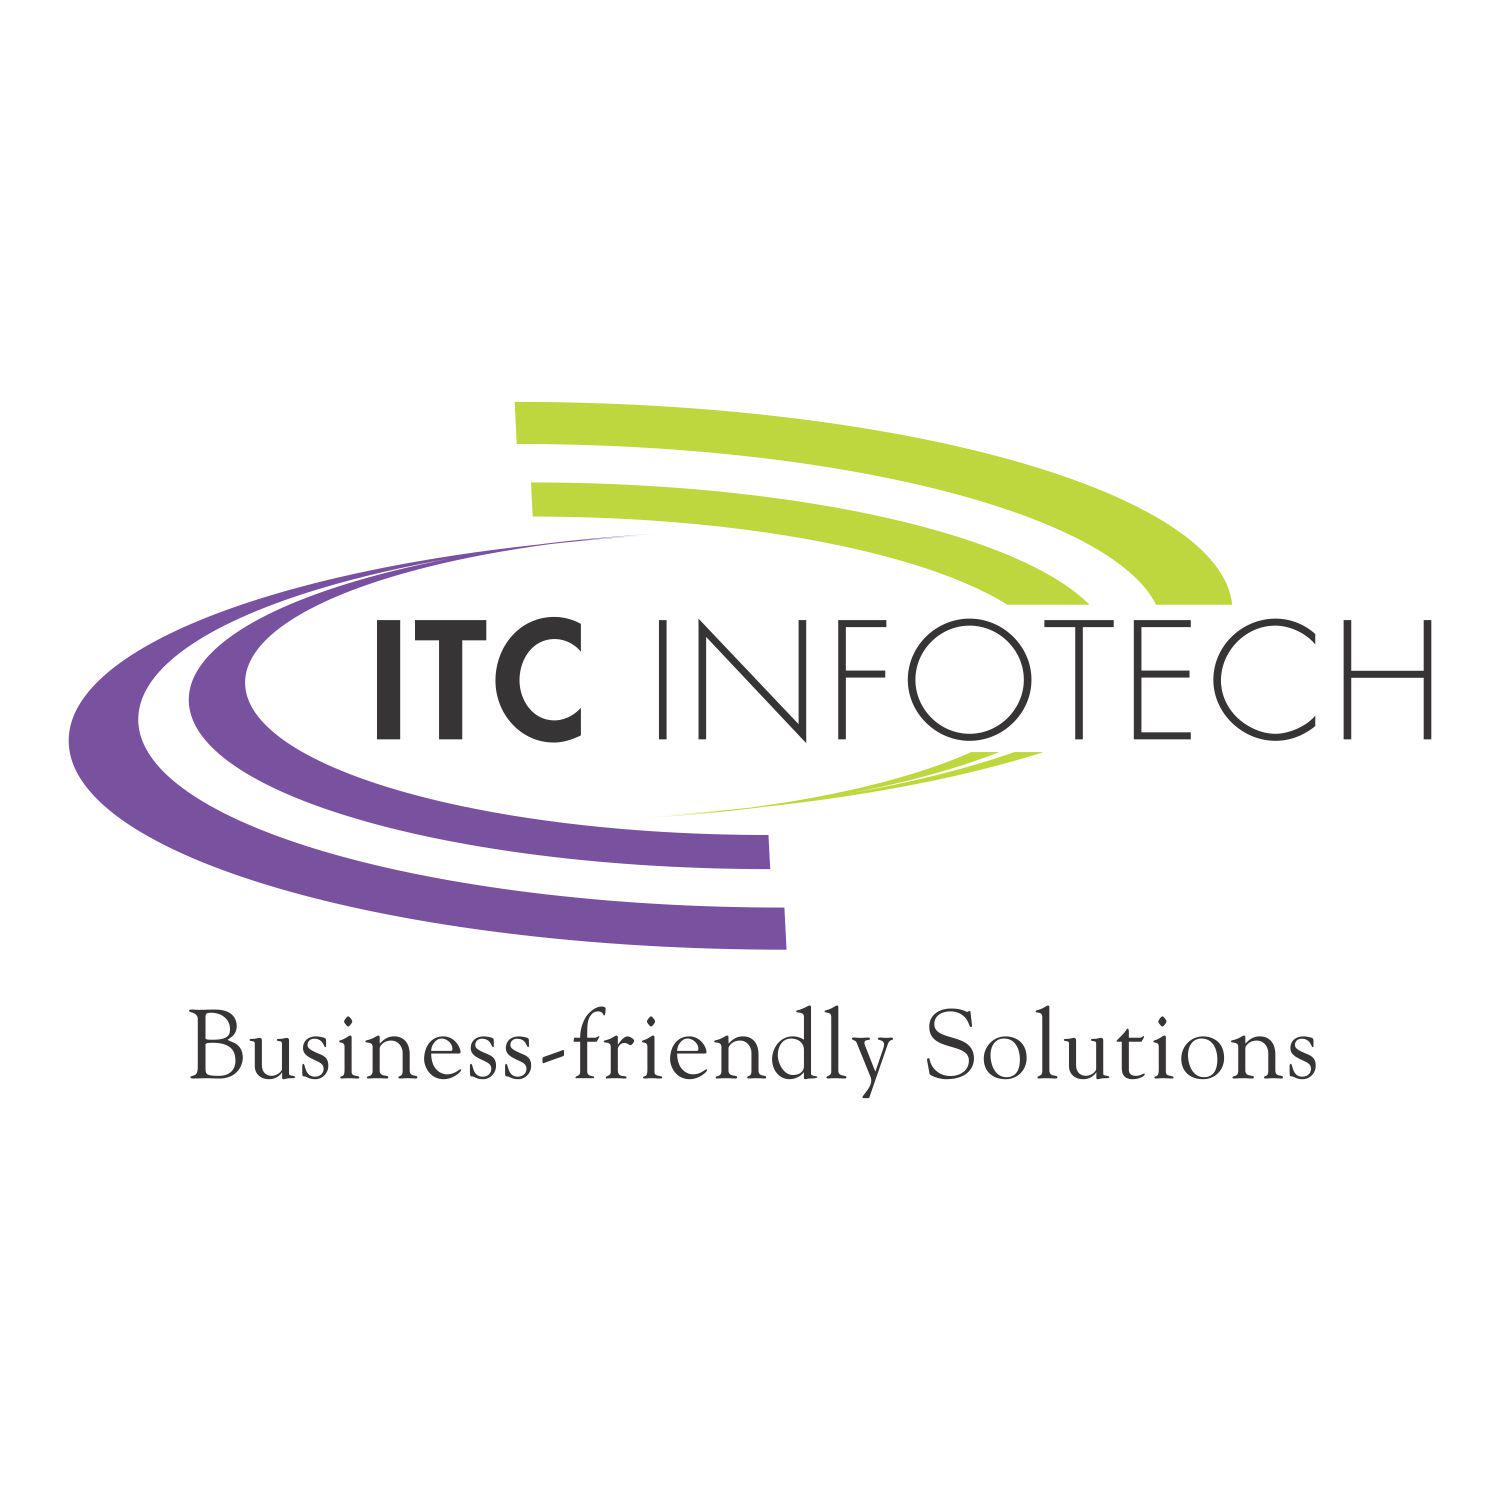 ITC Infotech profile on Qualified.One